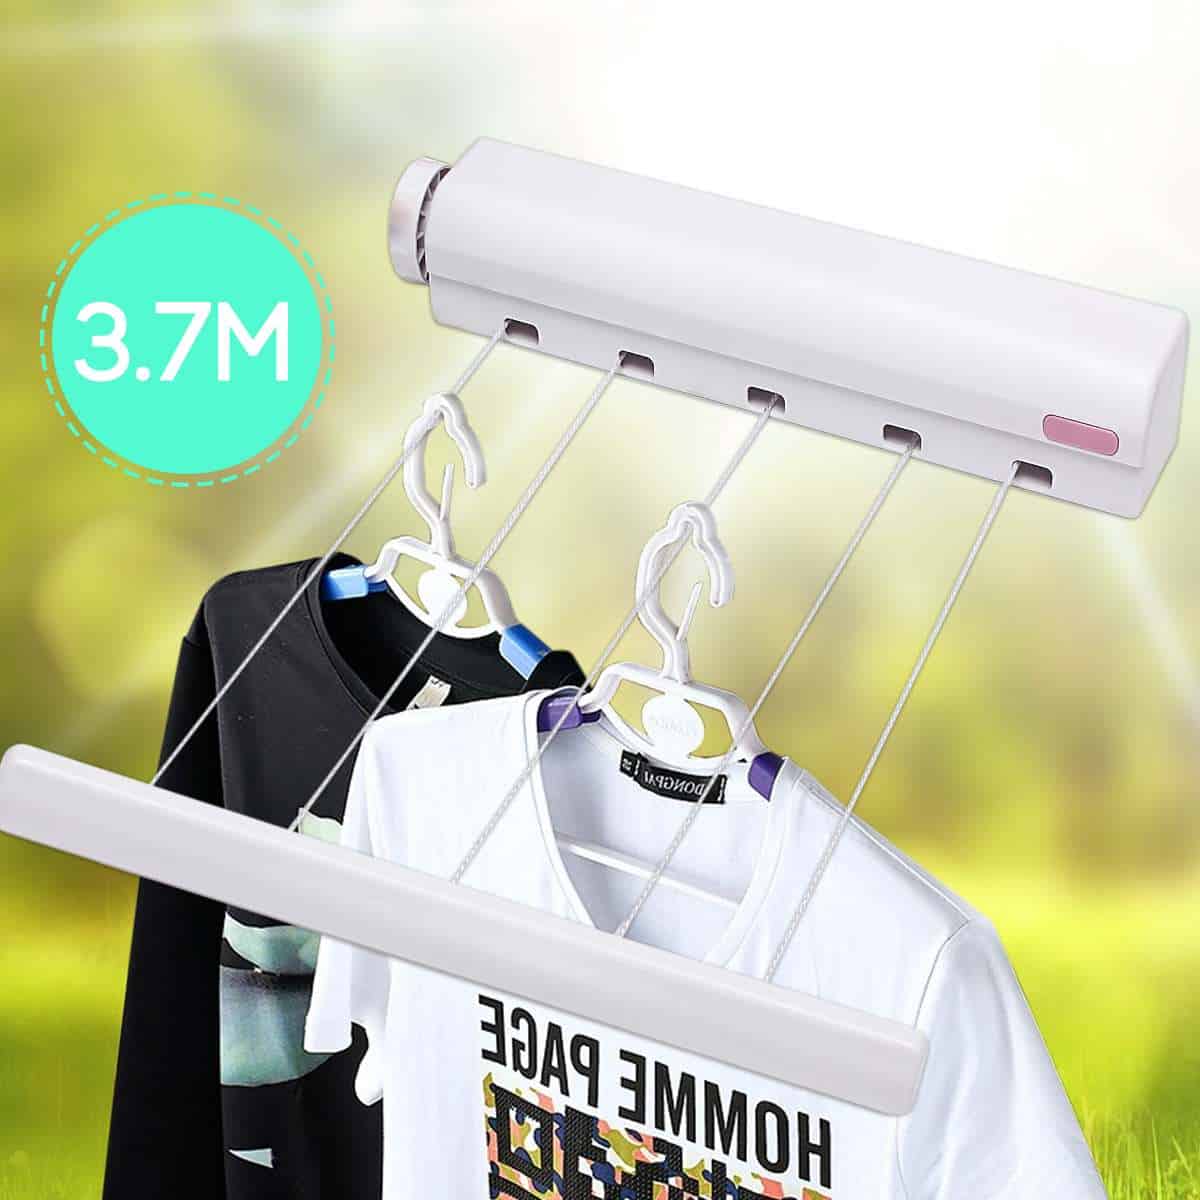 3.7M 5 Line Retractable Clothes Airer Washing Line Laundry Wall Mount Dryer Hanger Clothesline Outdoor Washing Line Drying Rack